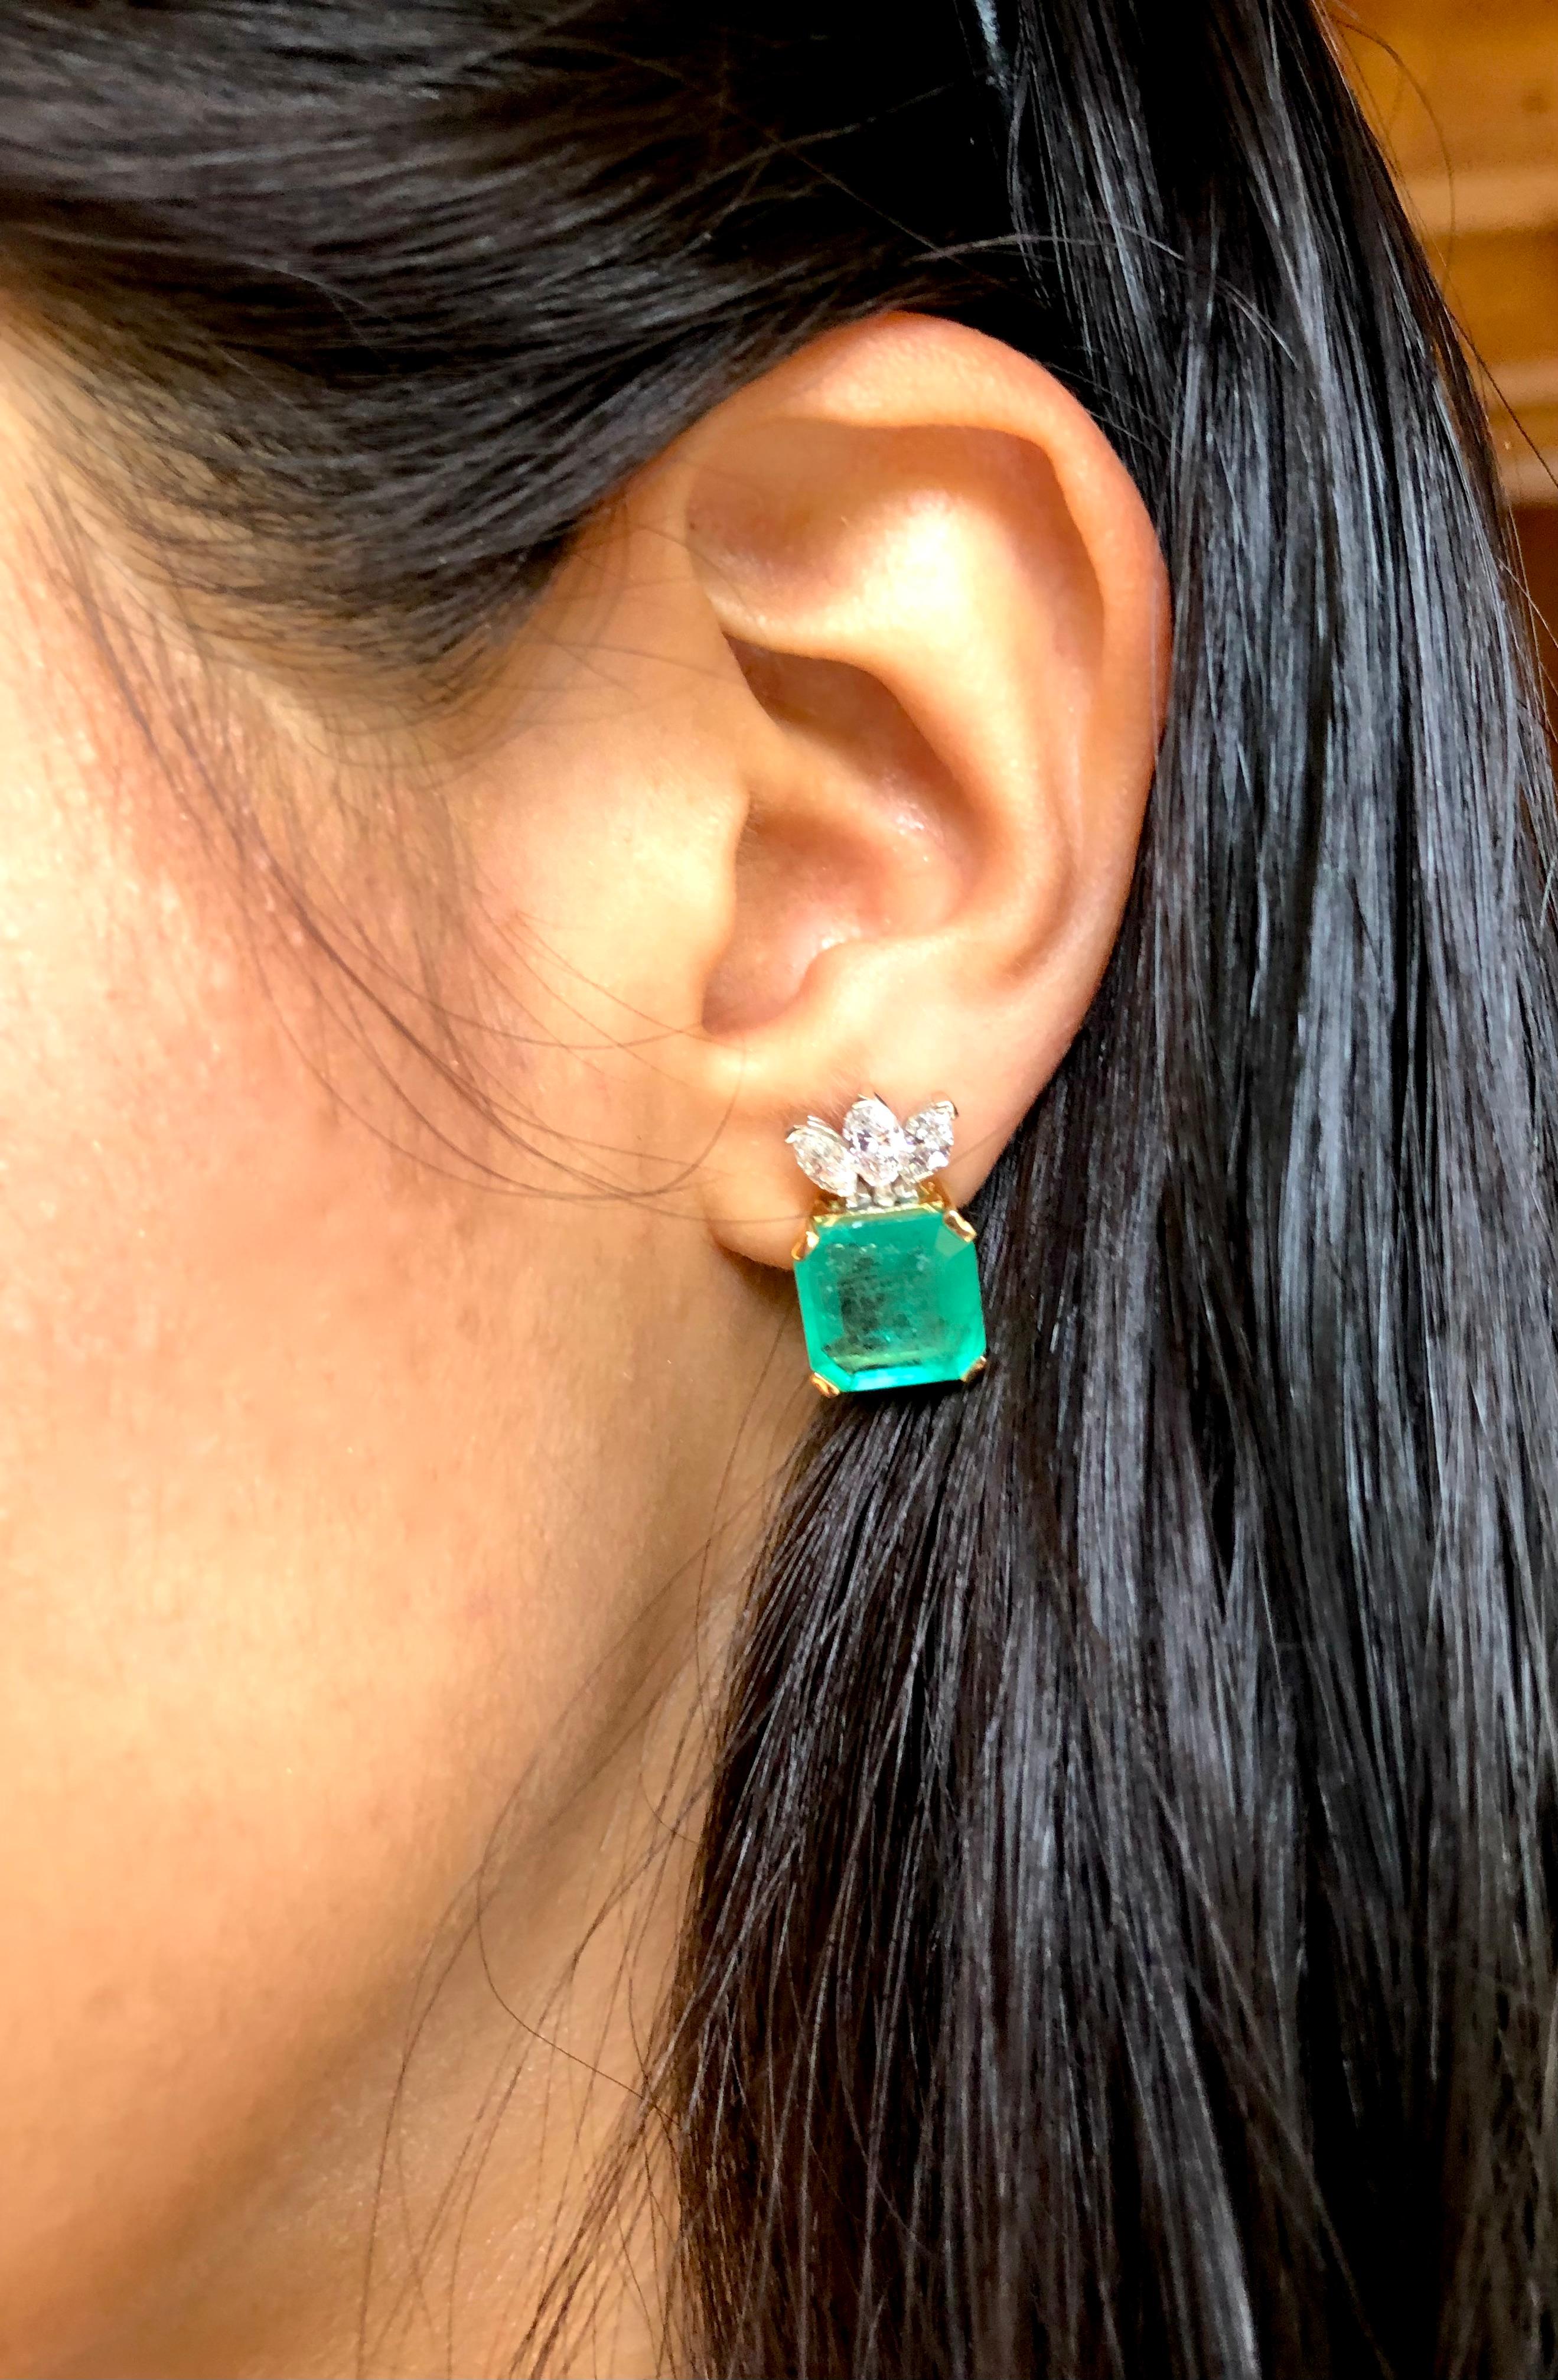 CDTEC Certified 12.20 carats total weight square natural Colombian emerald and diamonds Earrings in 18k yellow/white gold. Emerald cut natural Colombian emeralds, medium green, with visible natural inclusions. (Natural emeralds are commonly